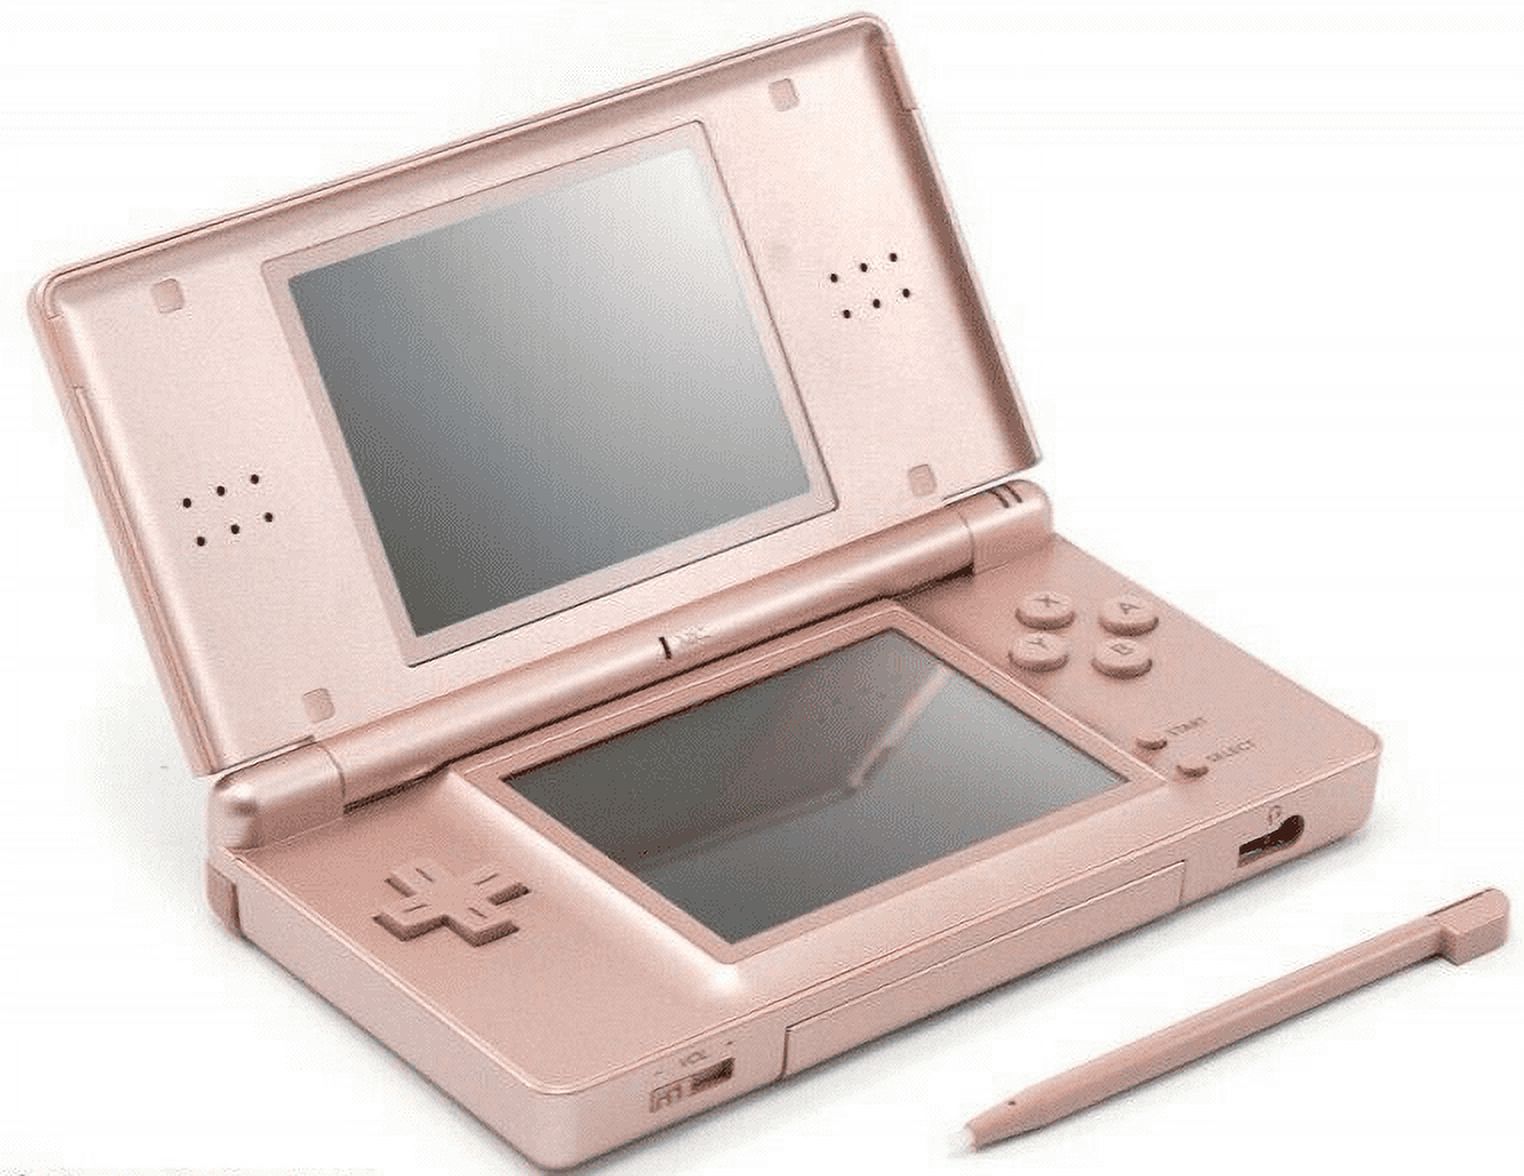 Authentic Nintendo DS Lite Console Metallic Rose with Stylus and Charger - 100% OEM - image 1 of 3